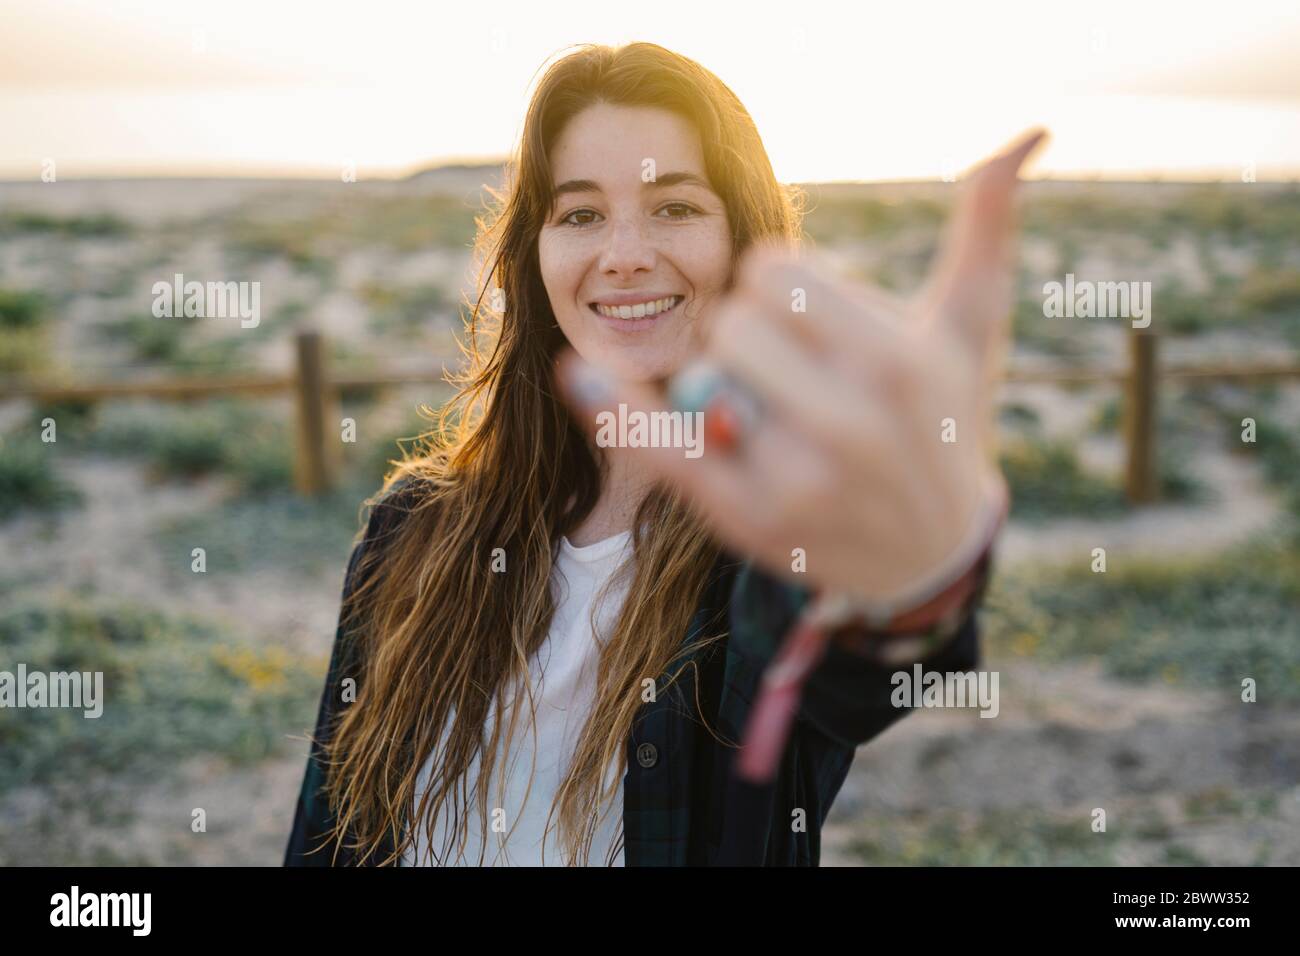 Portrait of smiling young woman  showing shaka sign Stock Photo